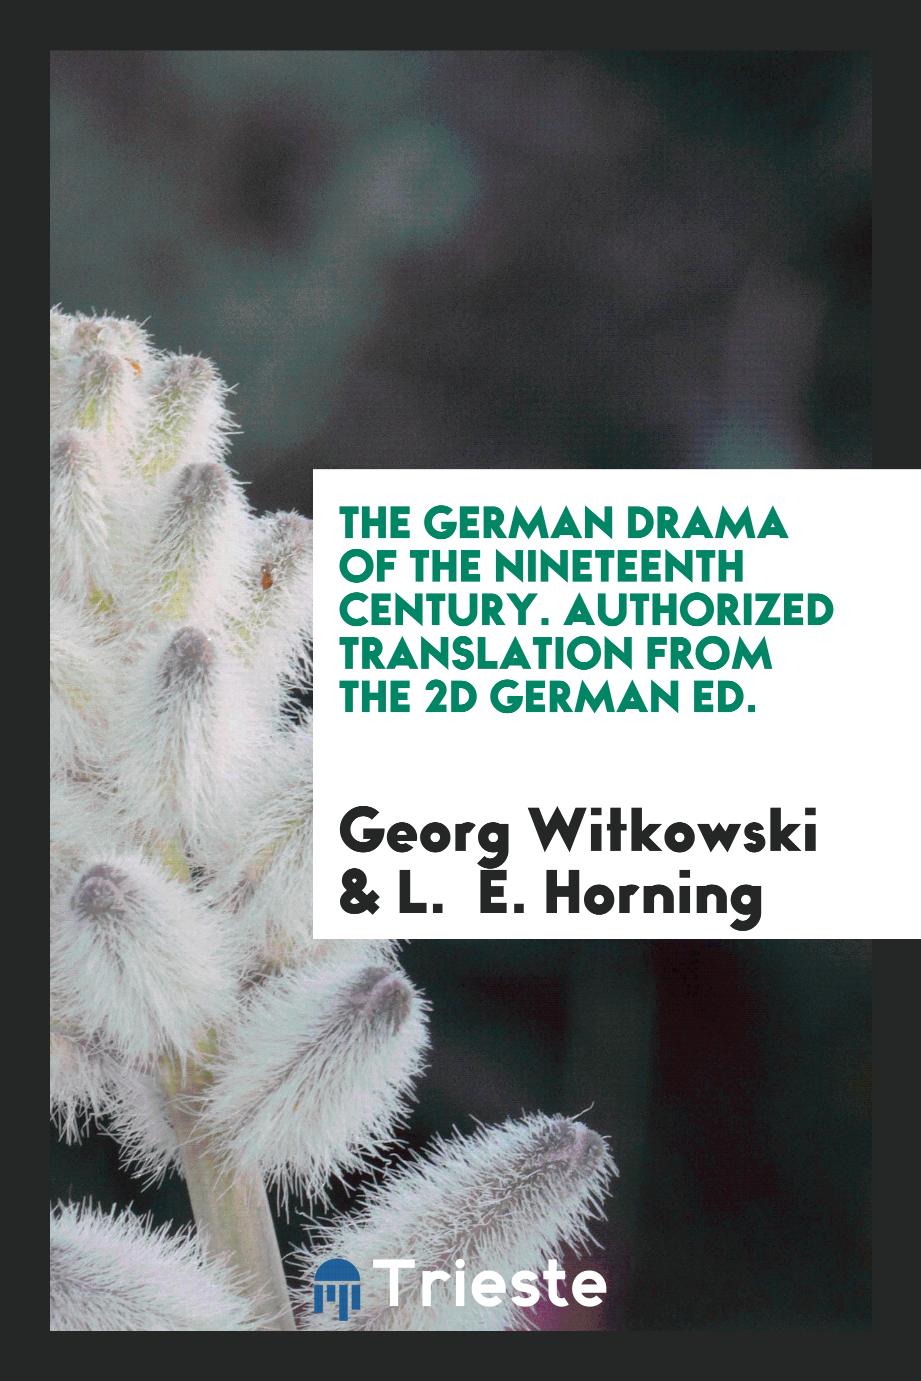 The German drama of the nineteenth century. Authorized translation from the 2d German ed.